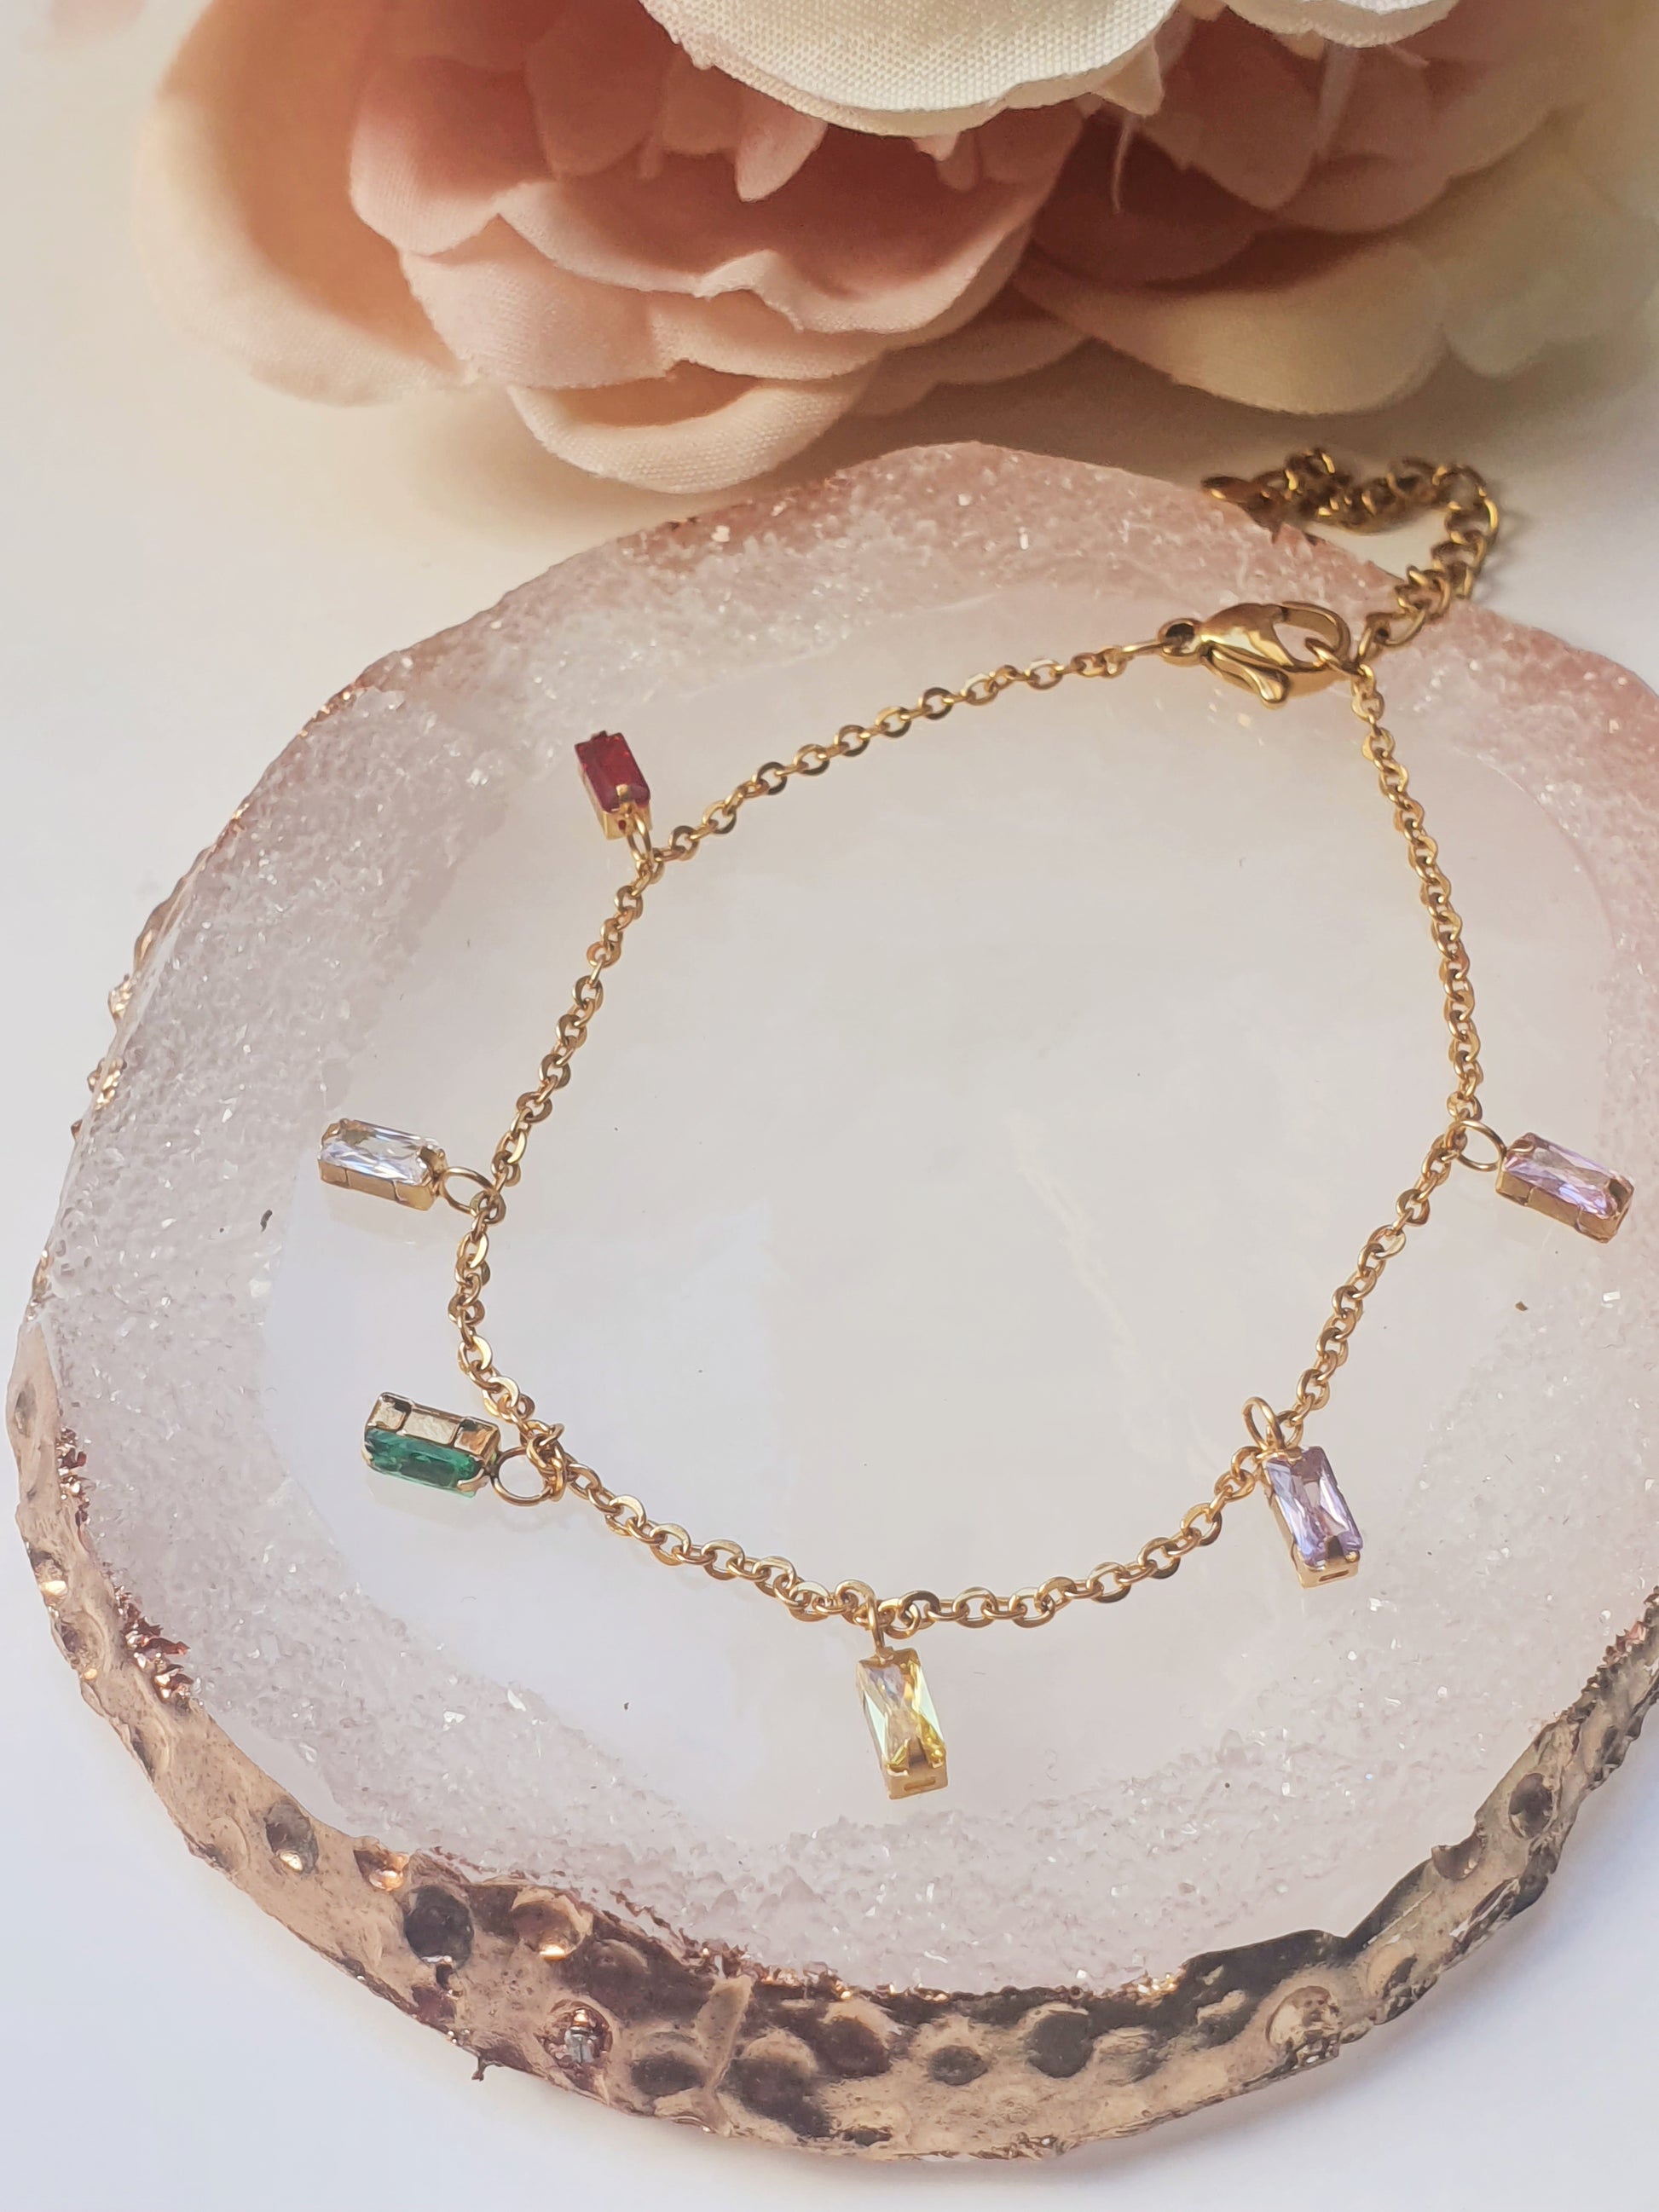 A dainty gold bracelet with dangling gems in multiple colours sits on a clear agate coaster